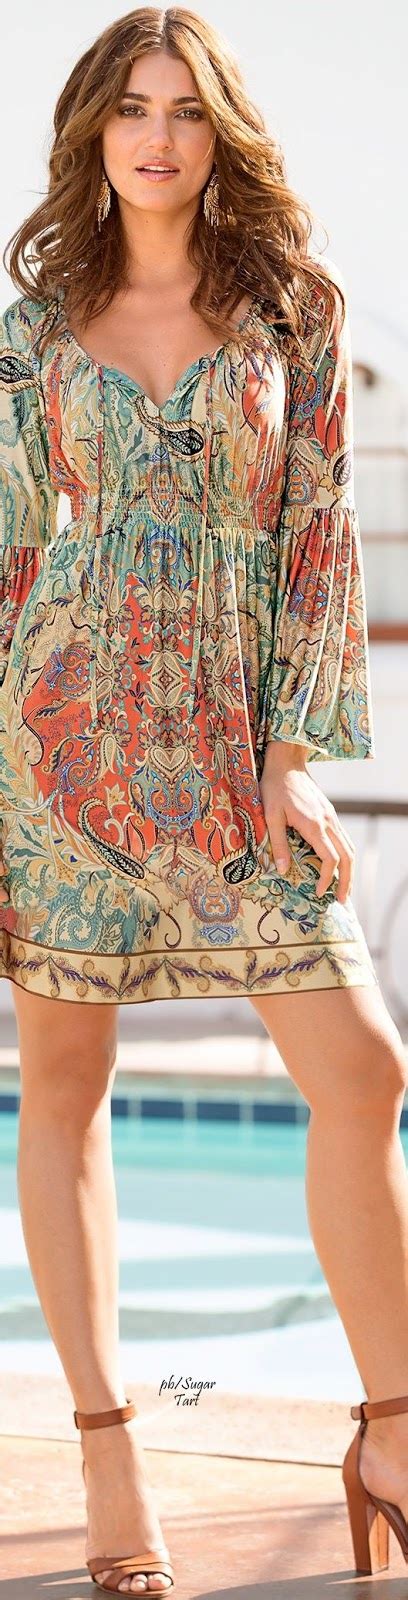 14 Boho Chic Outfits Ideas Summer 2017 Design And Wellness